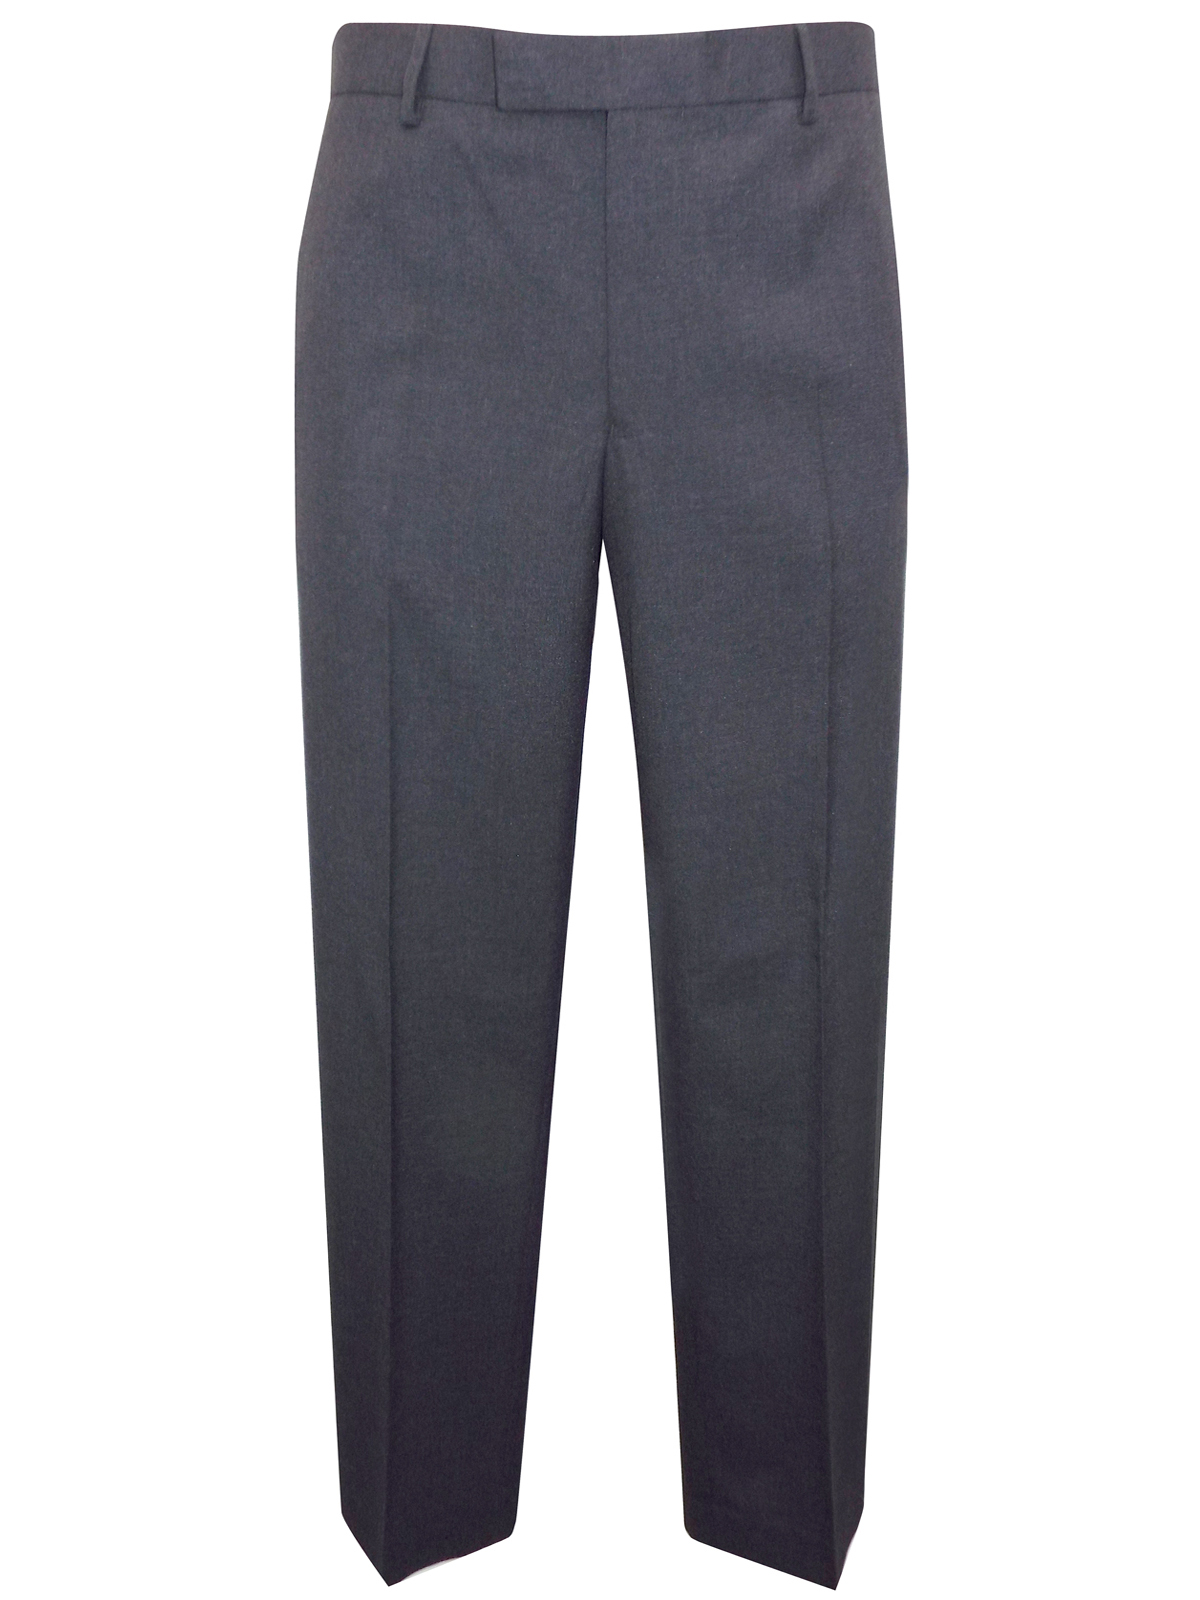 Marks and Spencer - - M&5 CHARCOAL Straight Fit Centre Crease Trousers ...